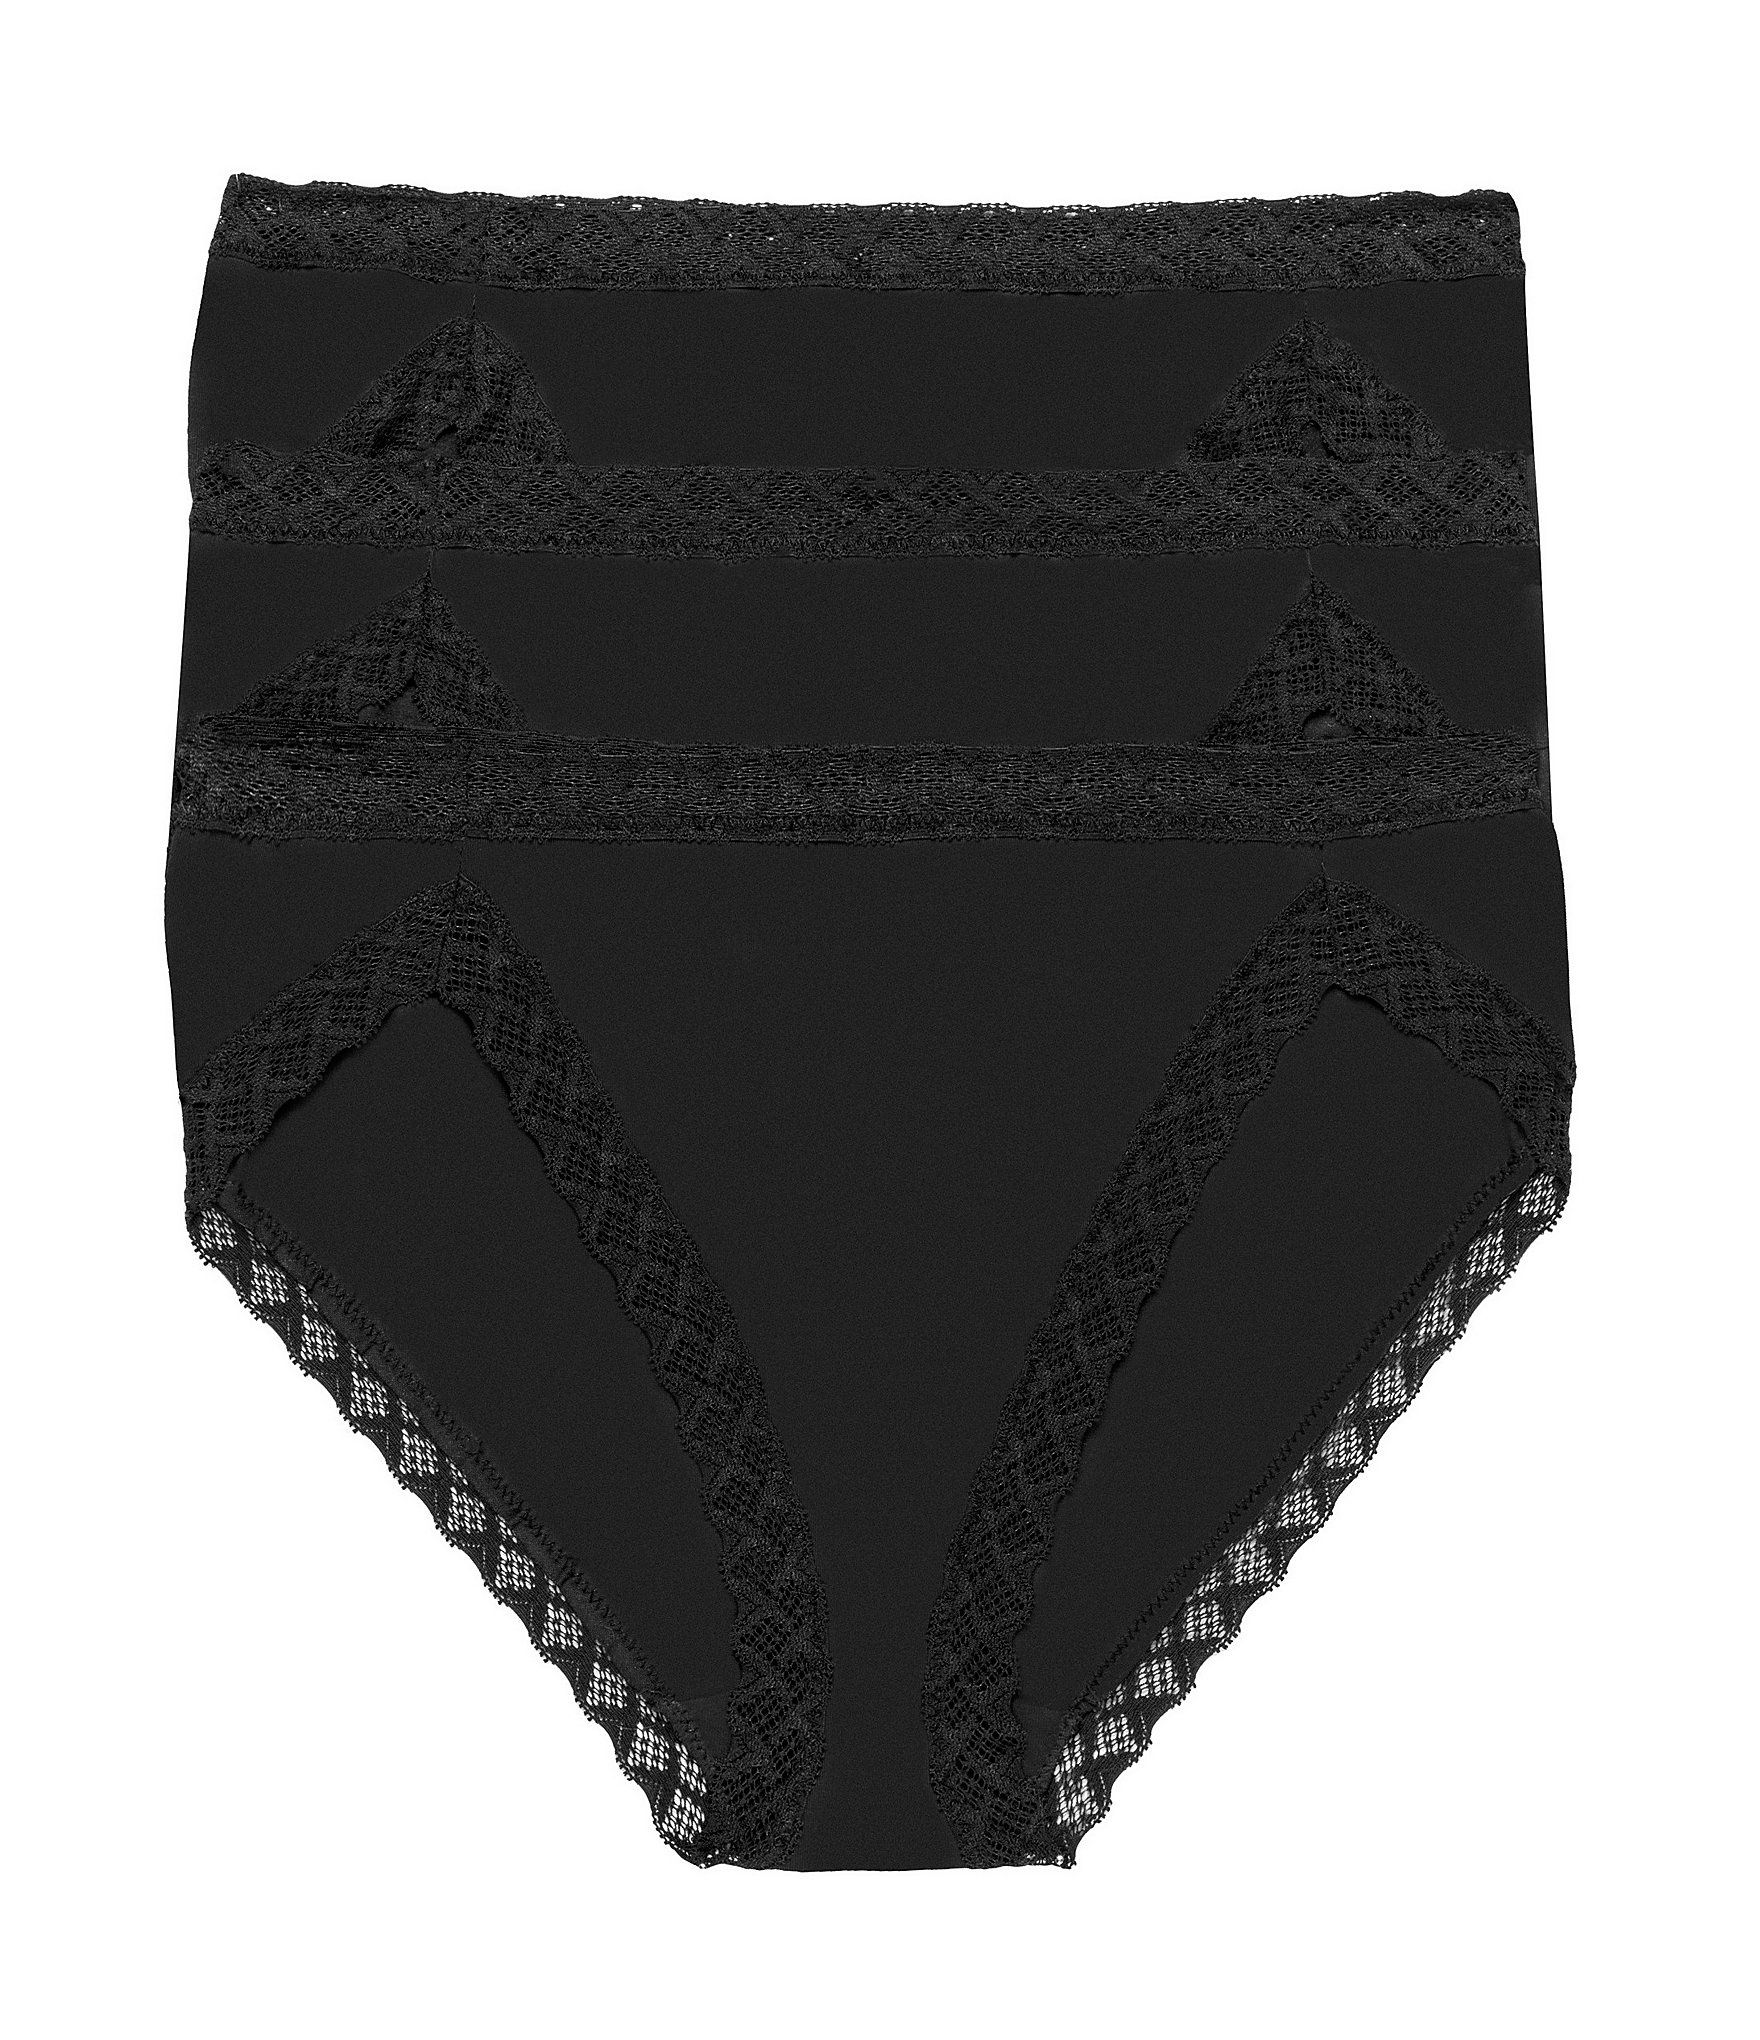 Bliss Allure One-Size Lace French Cut Brief by Natori at ORCHARD MILE